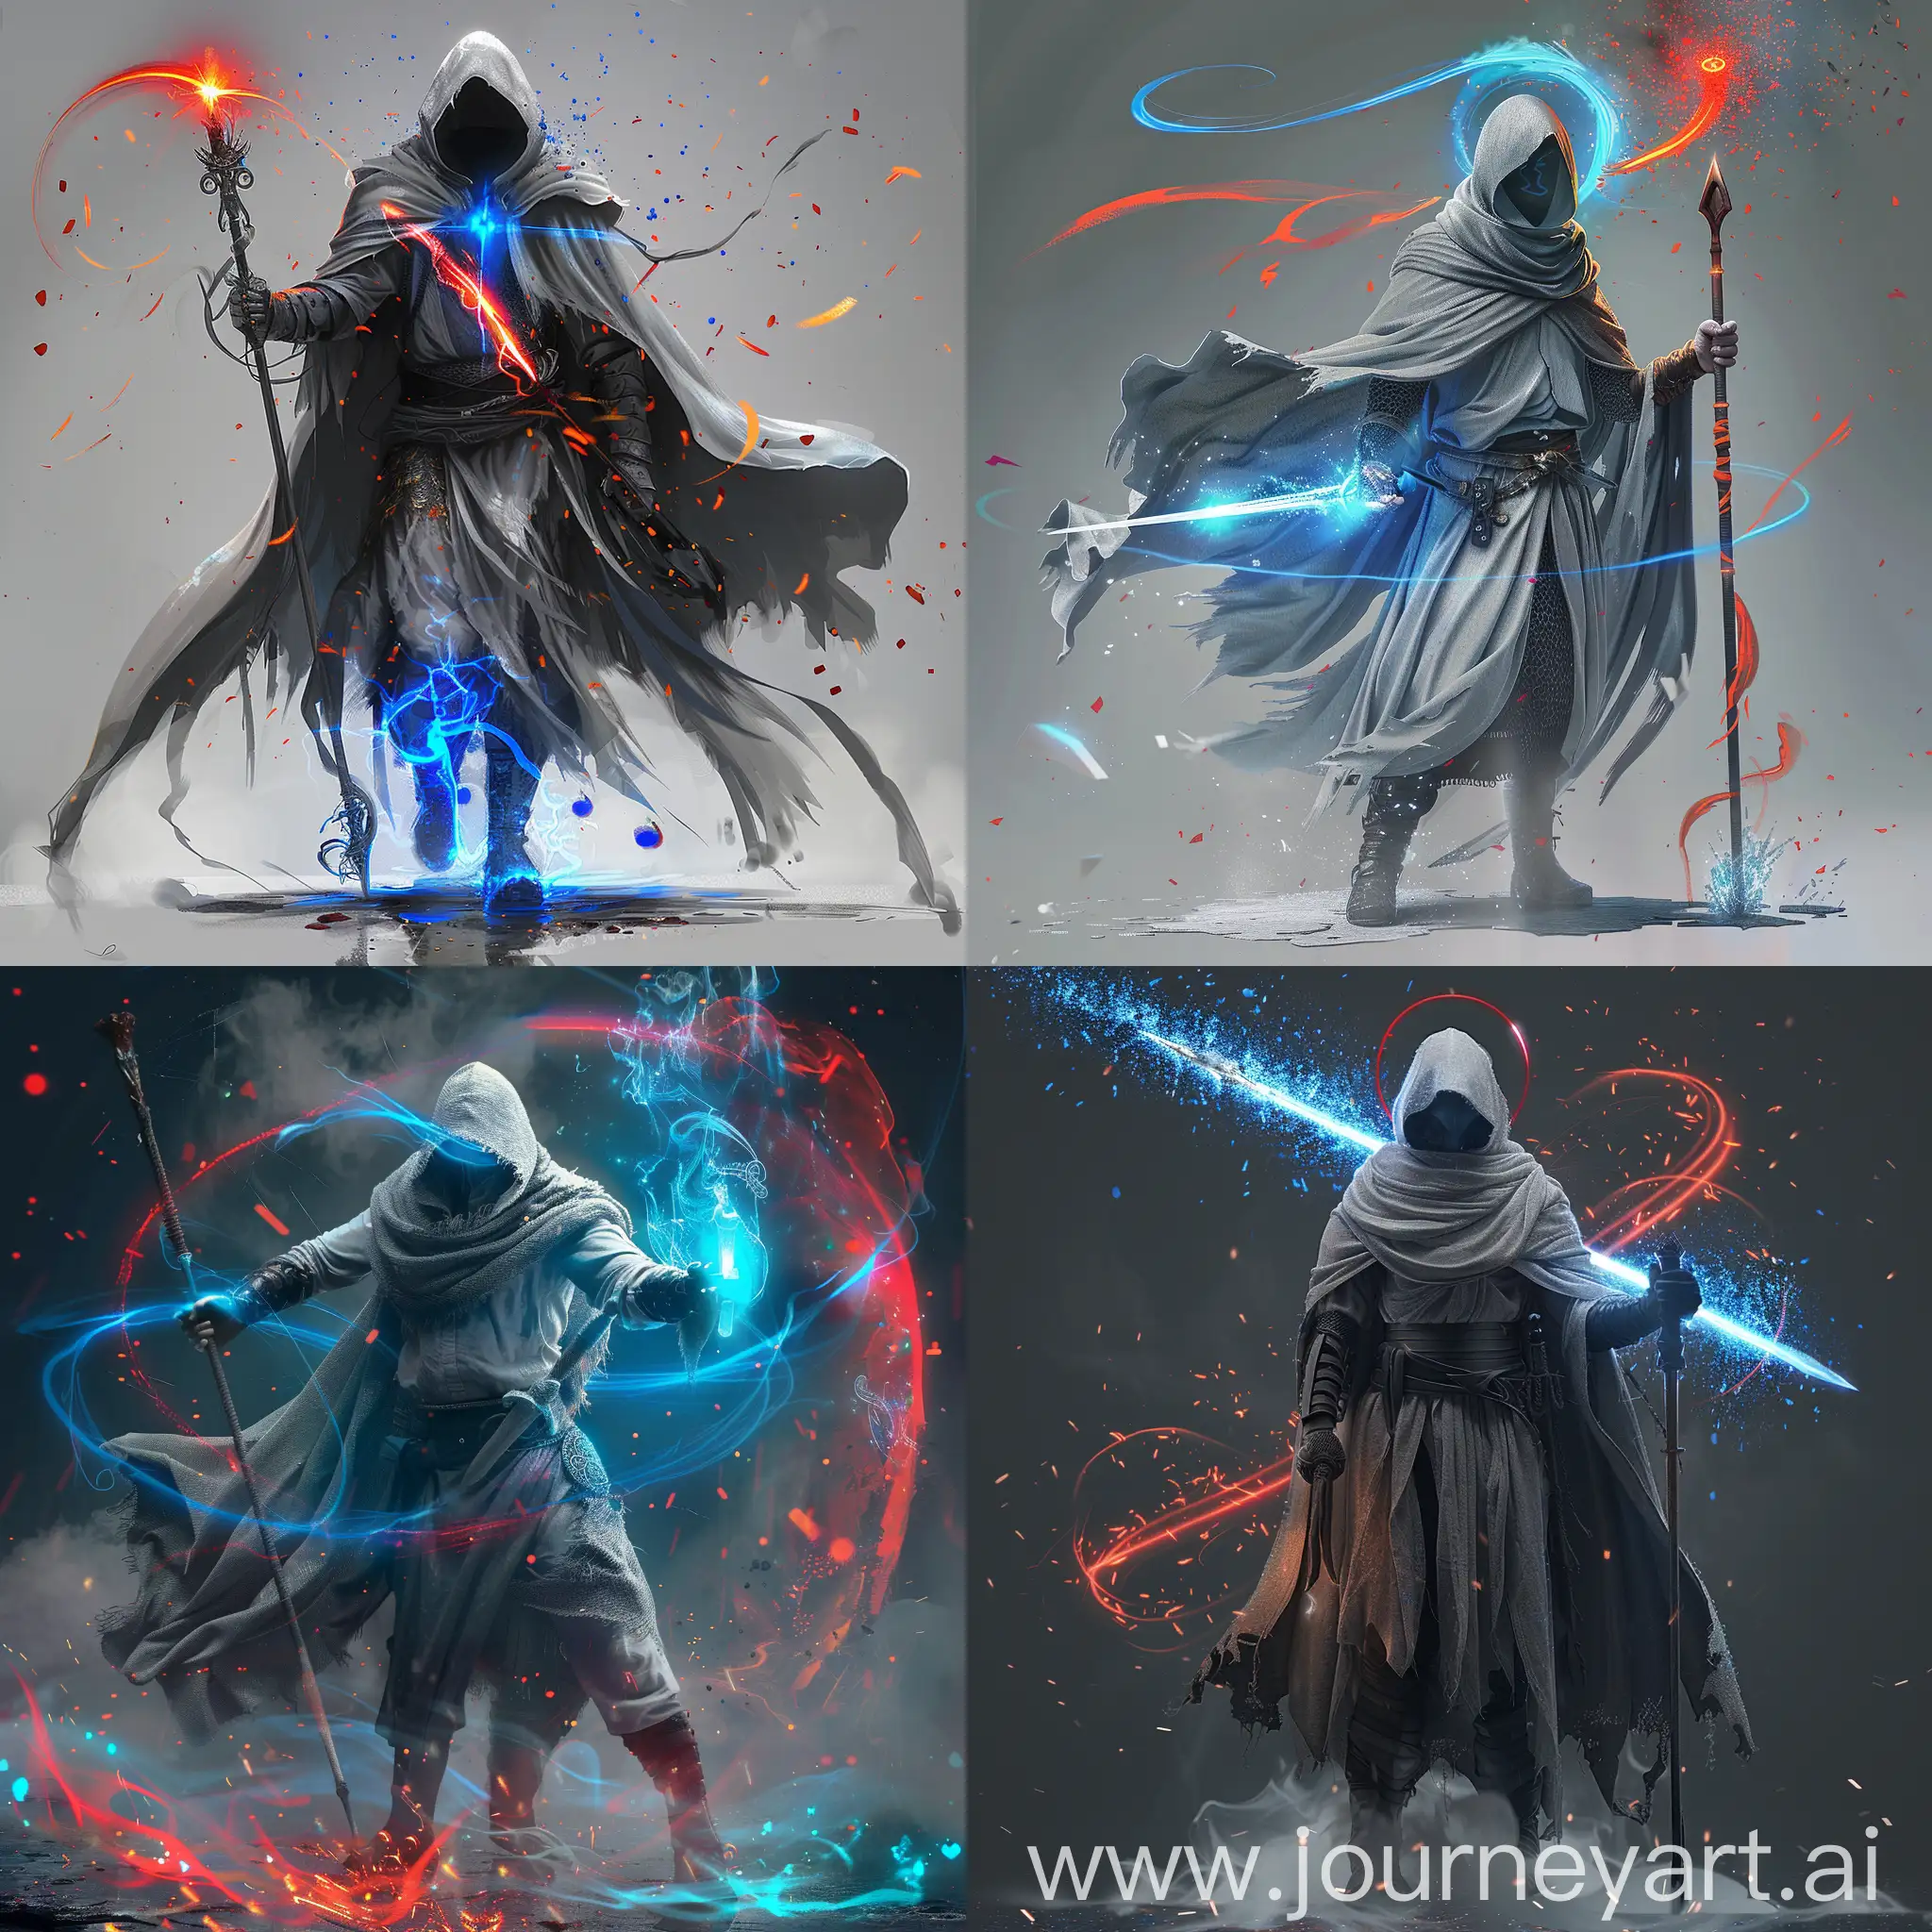 warmage with sword and staff, grey cape, blue aura, red halo, elemental particles, hd